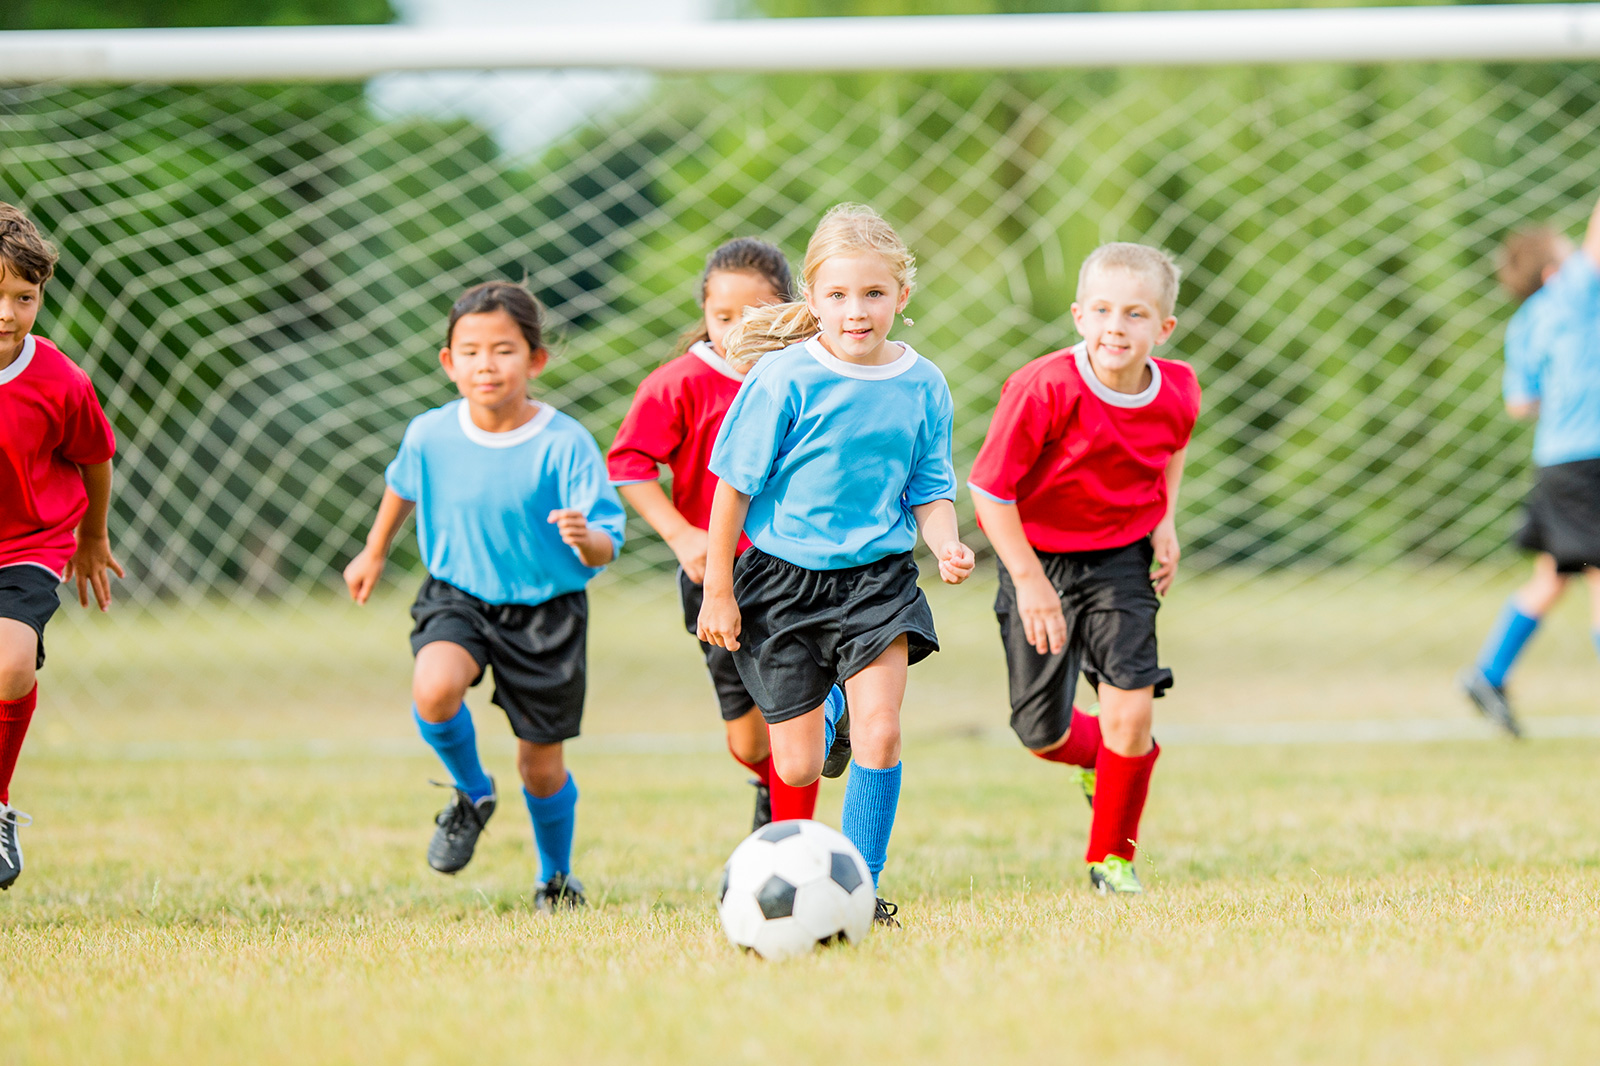 The Benefits of Youth Sports: Why Every Kid Should Play